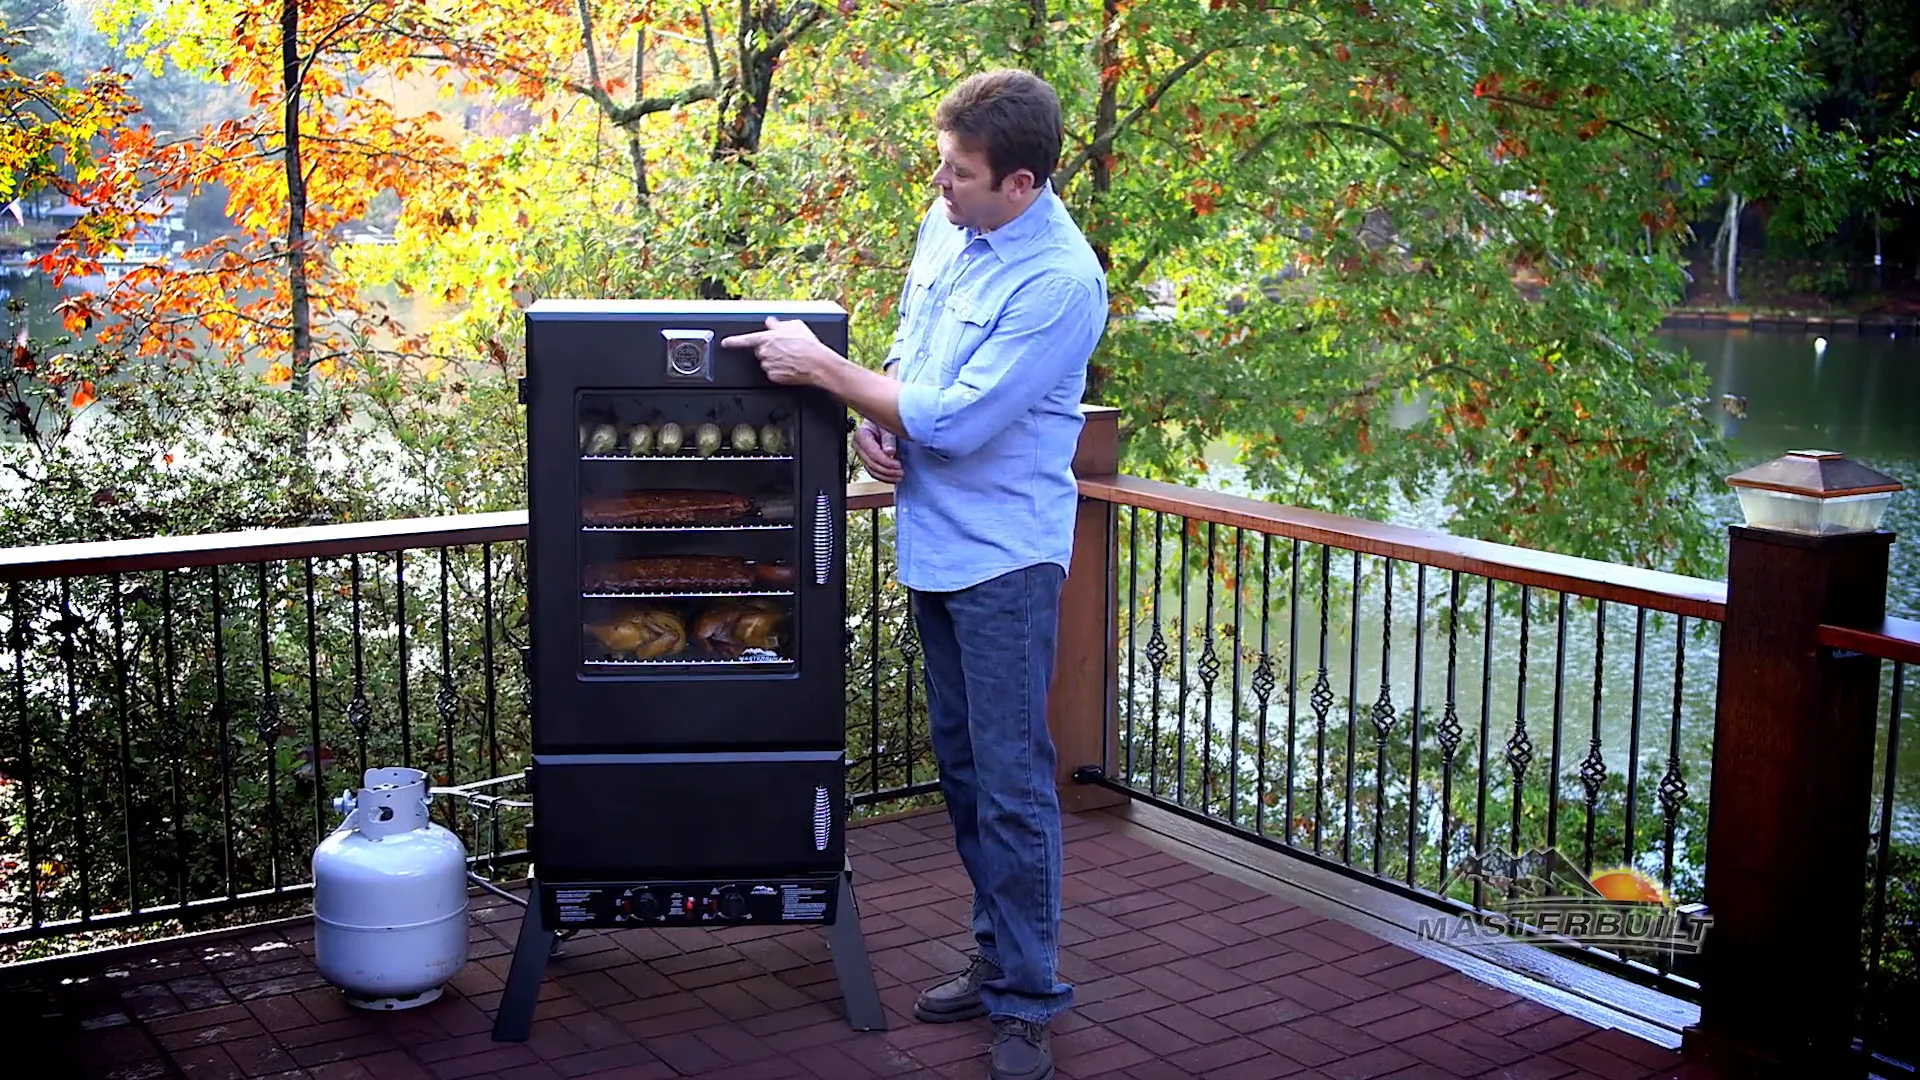 Masterbuilt 44 Propane Smoker: Features and Benefits on Vimeo